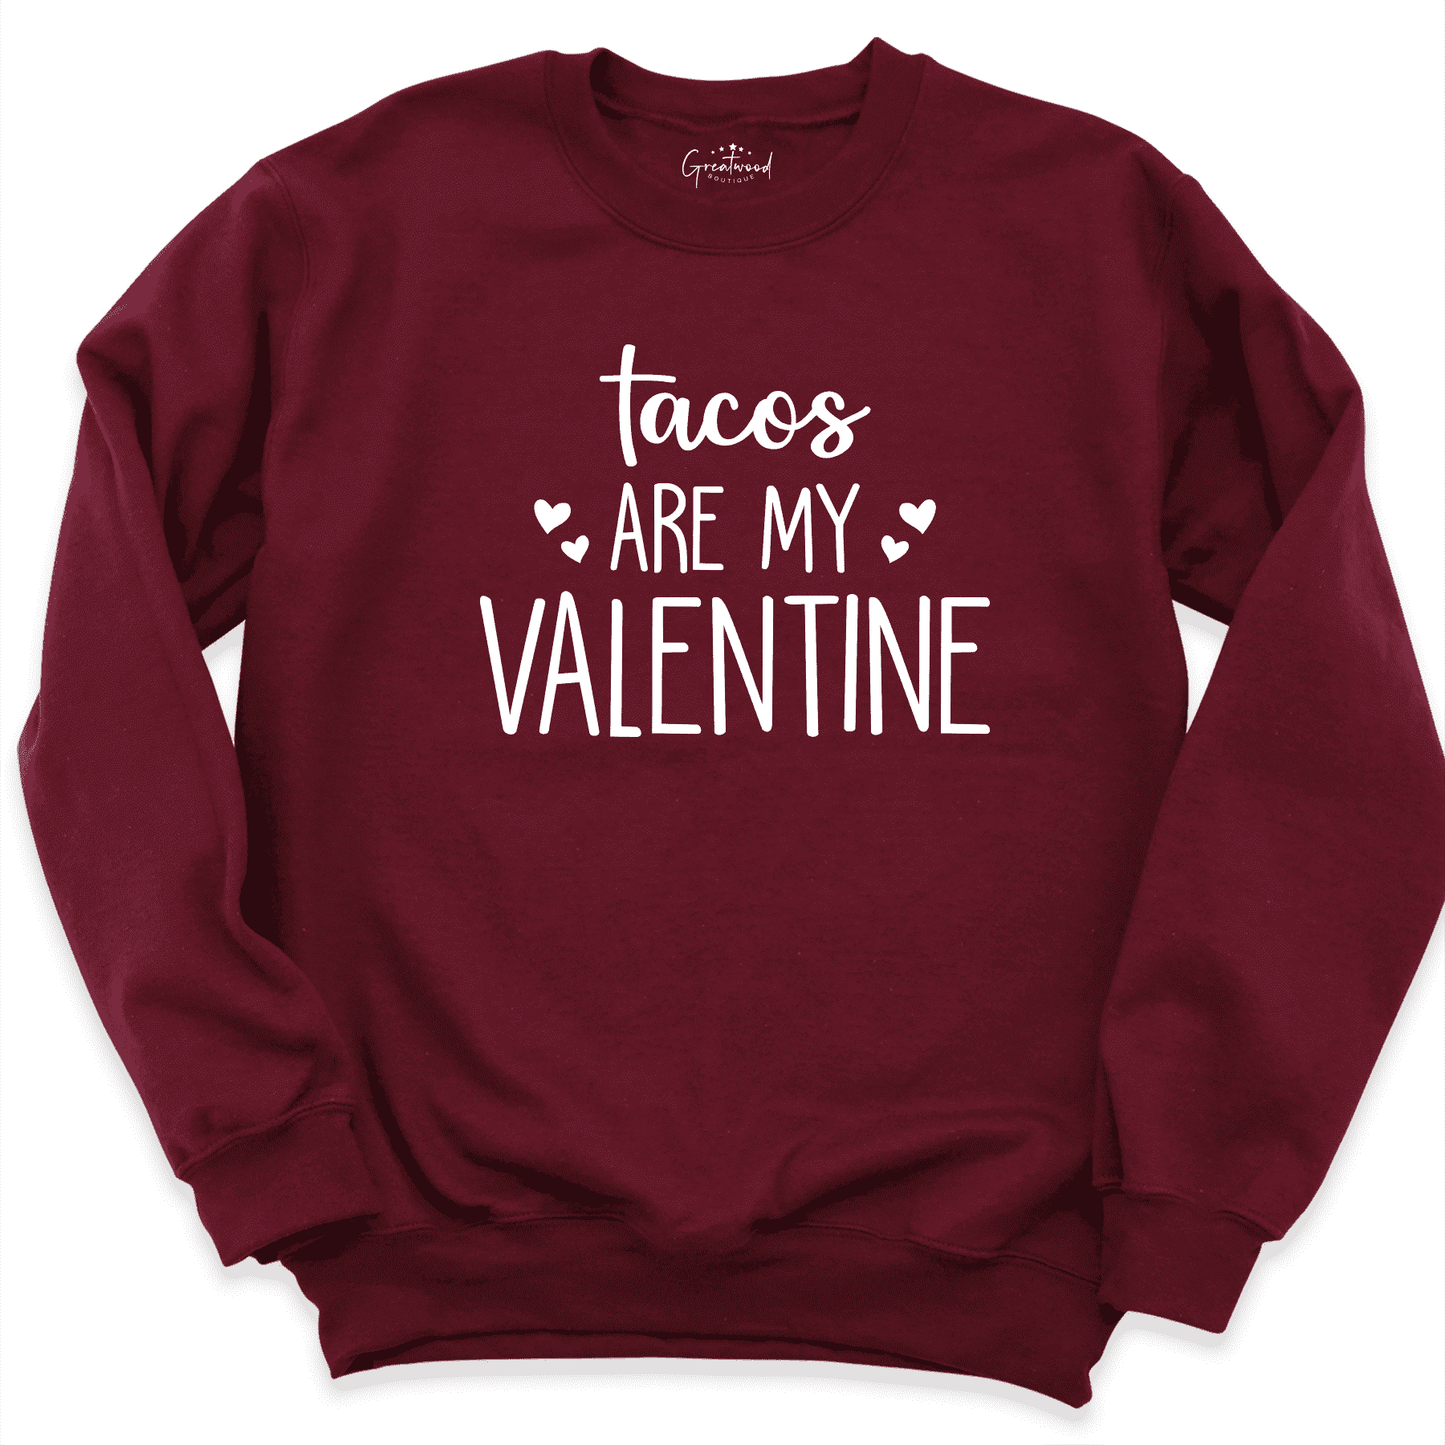 Tacos Are My Valentine Shirt